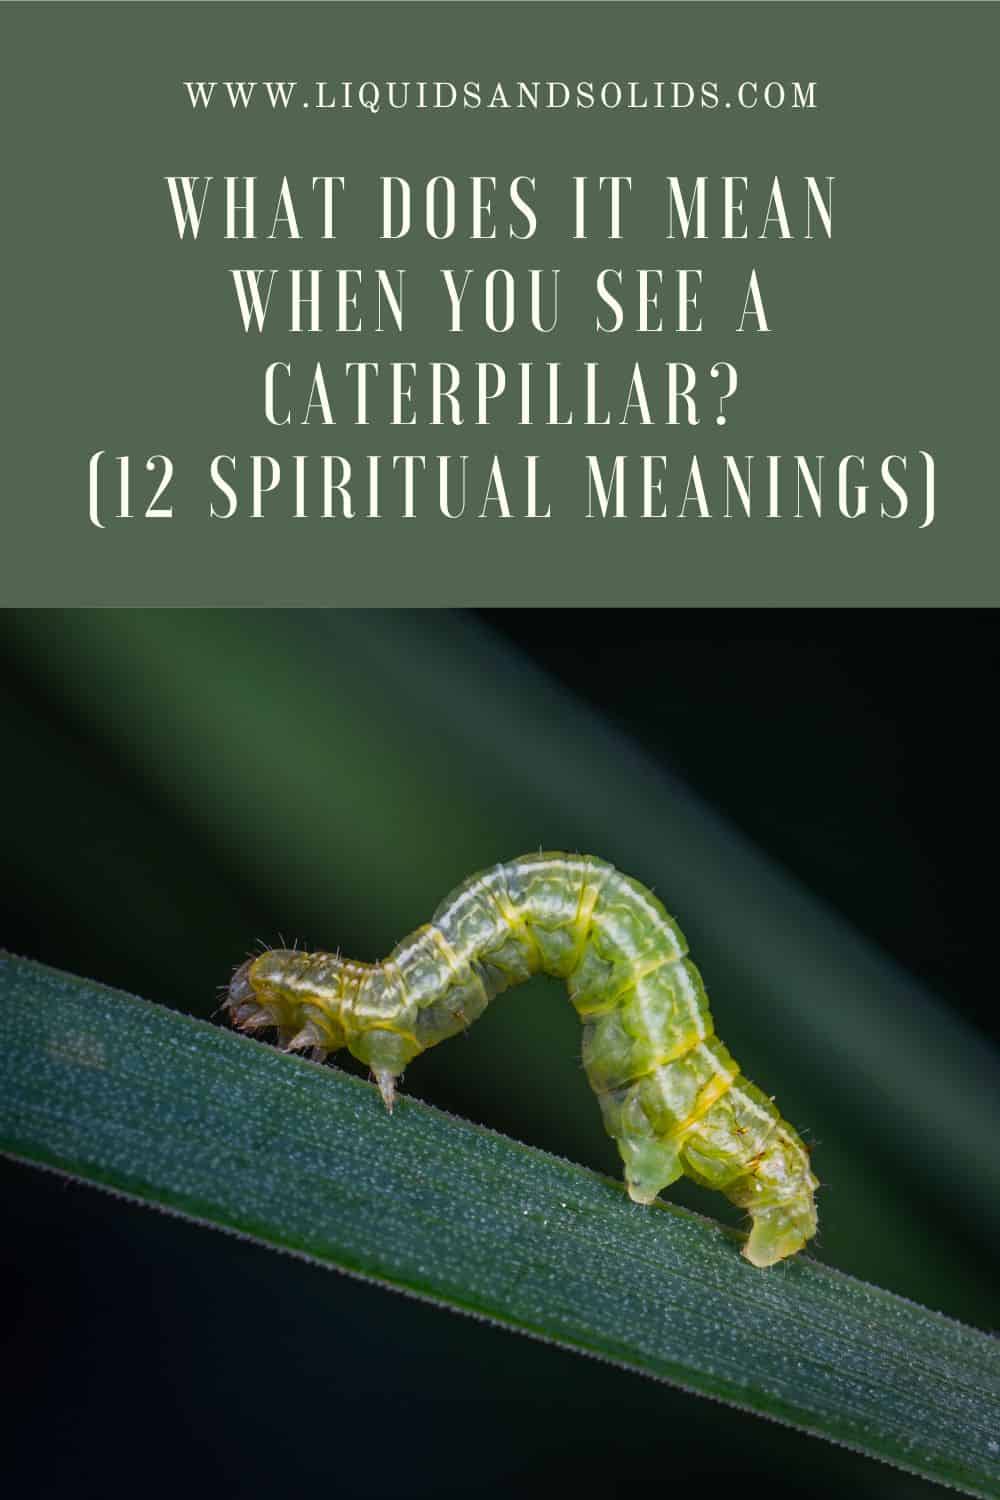 What does it mean when you see a caterpillar?